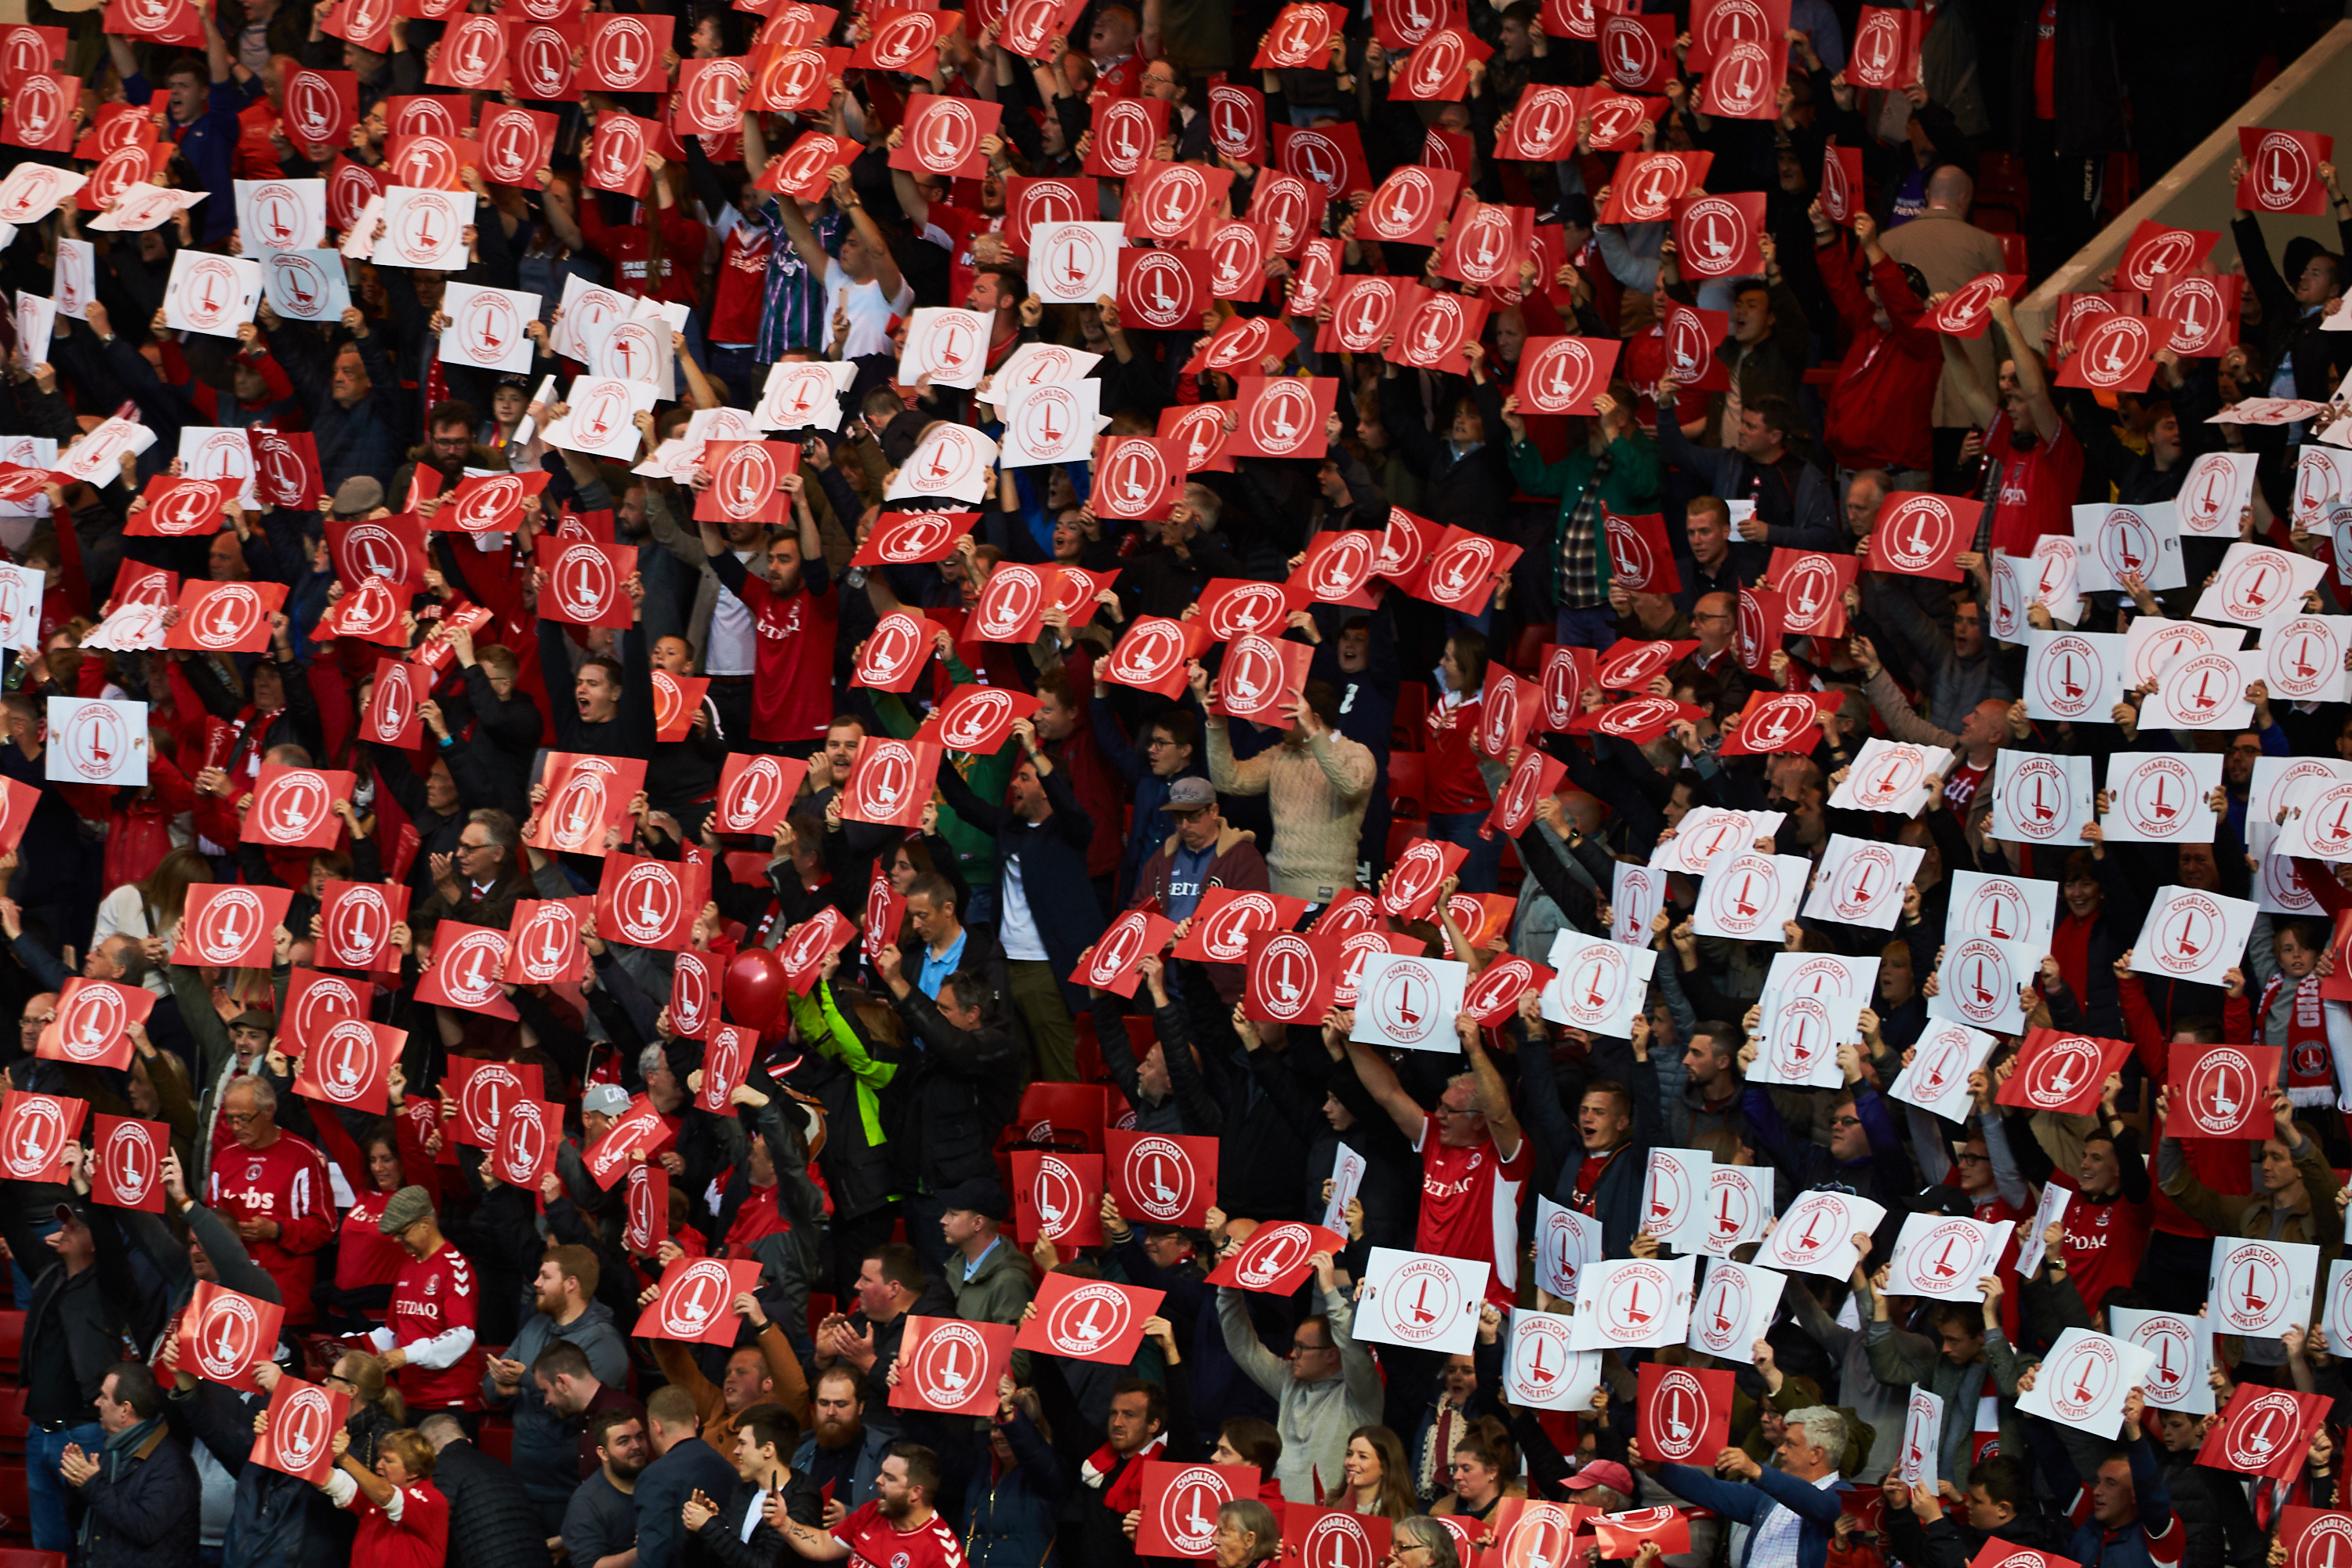 Addicks fans hold up Charlton badges ahead of the play-off final against Doncaster Rovers at The Valley in May 2019